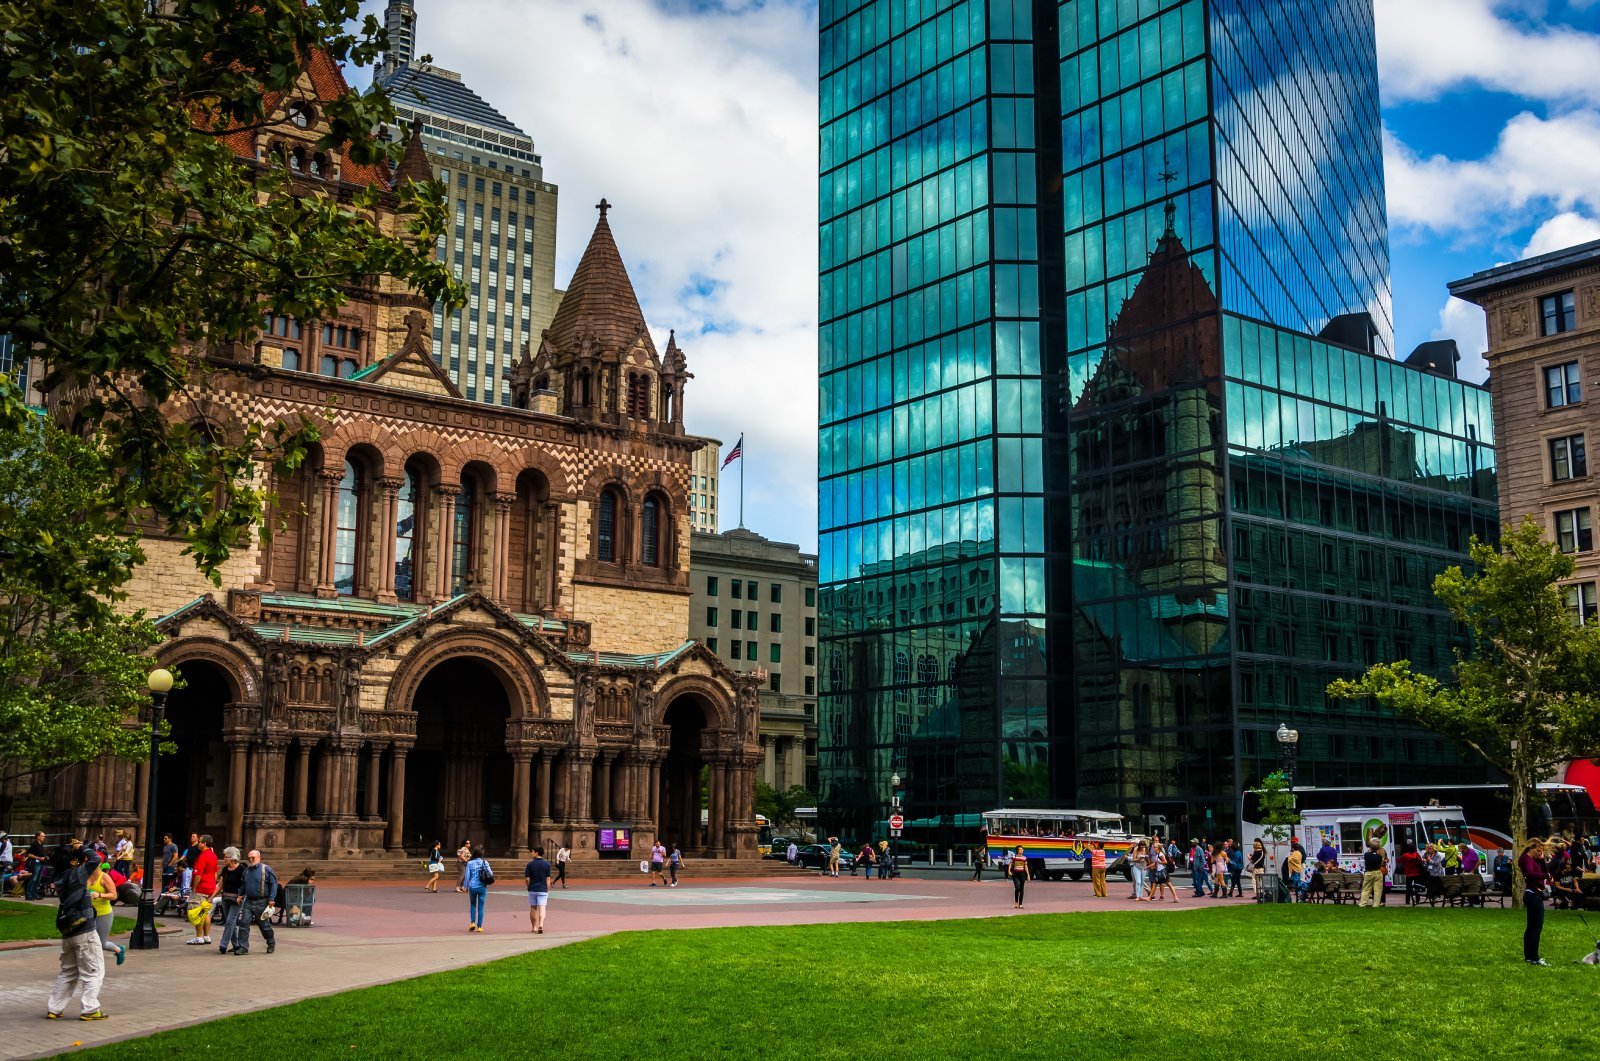 Image Credit: Shutterstock / ESB Professional <p><span>Not only is this Boston landmark a functioning Episcopal parish, but its Richardsonian Romanesque style and role in American history make it a must-visit for those interested in the intersection of faith and the founding of the nation.</span></p>